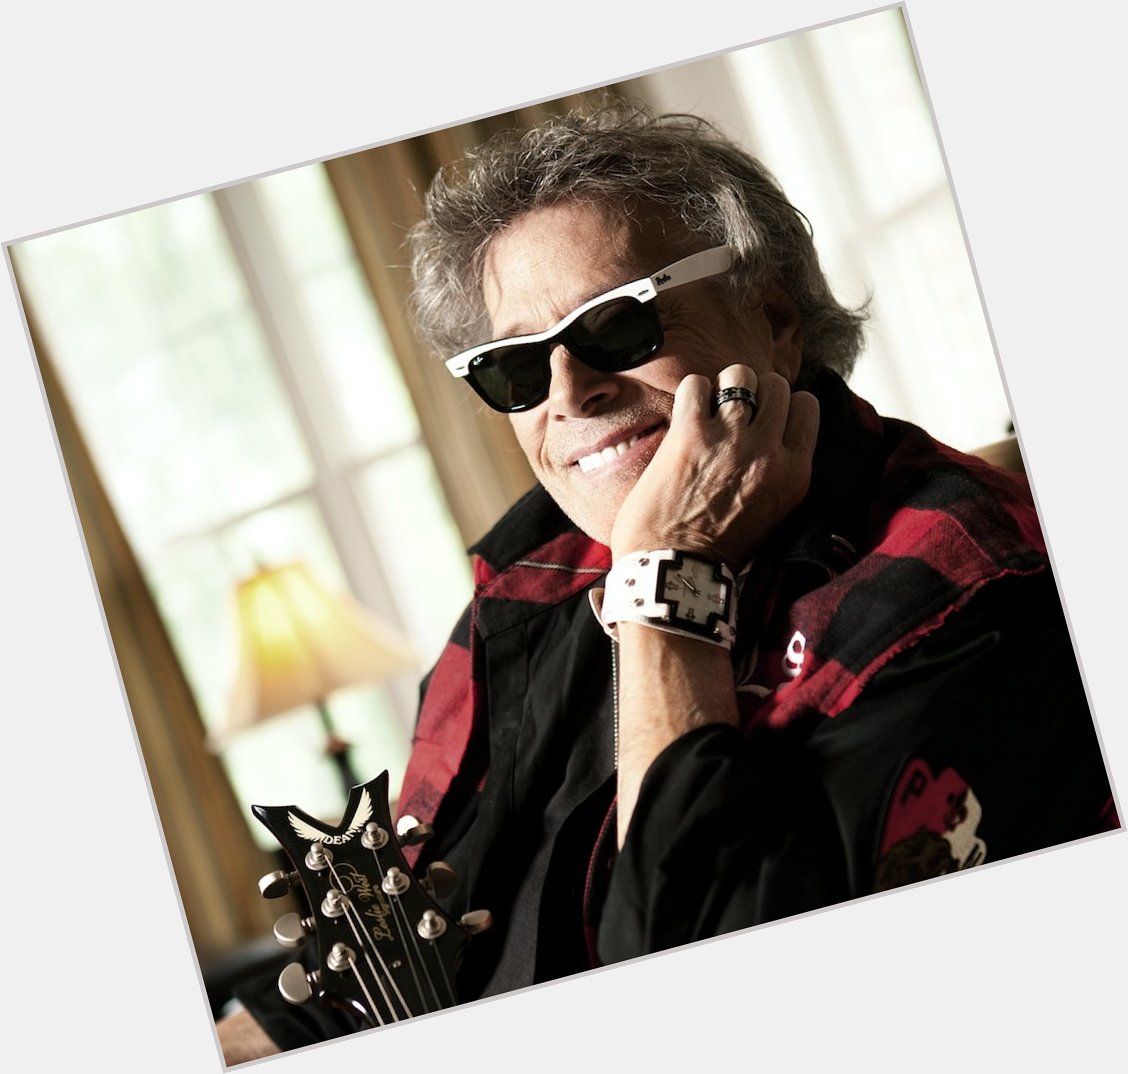 Join us in wishing a very Happy Birthday to Mr. Leslie West 